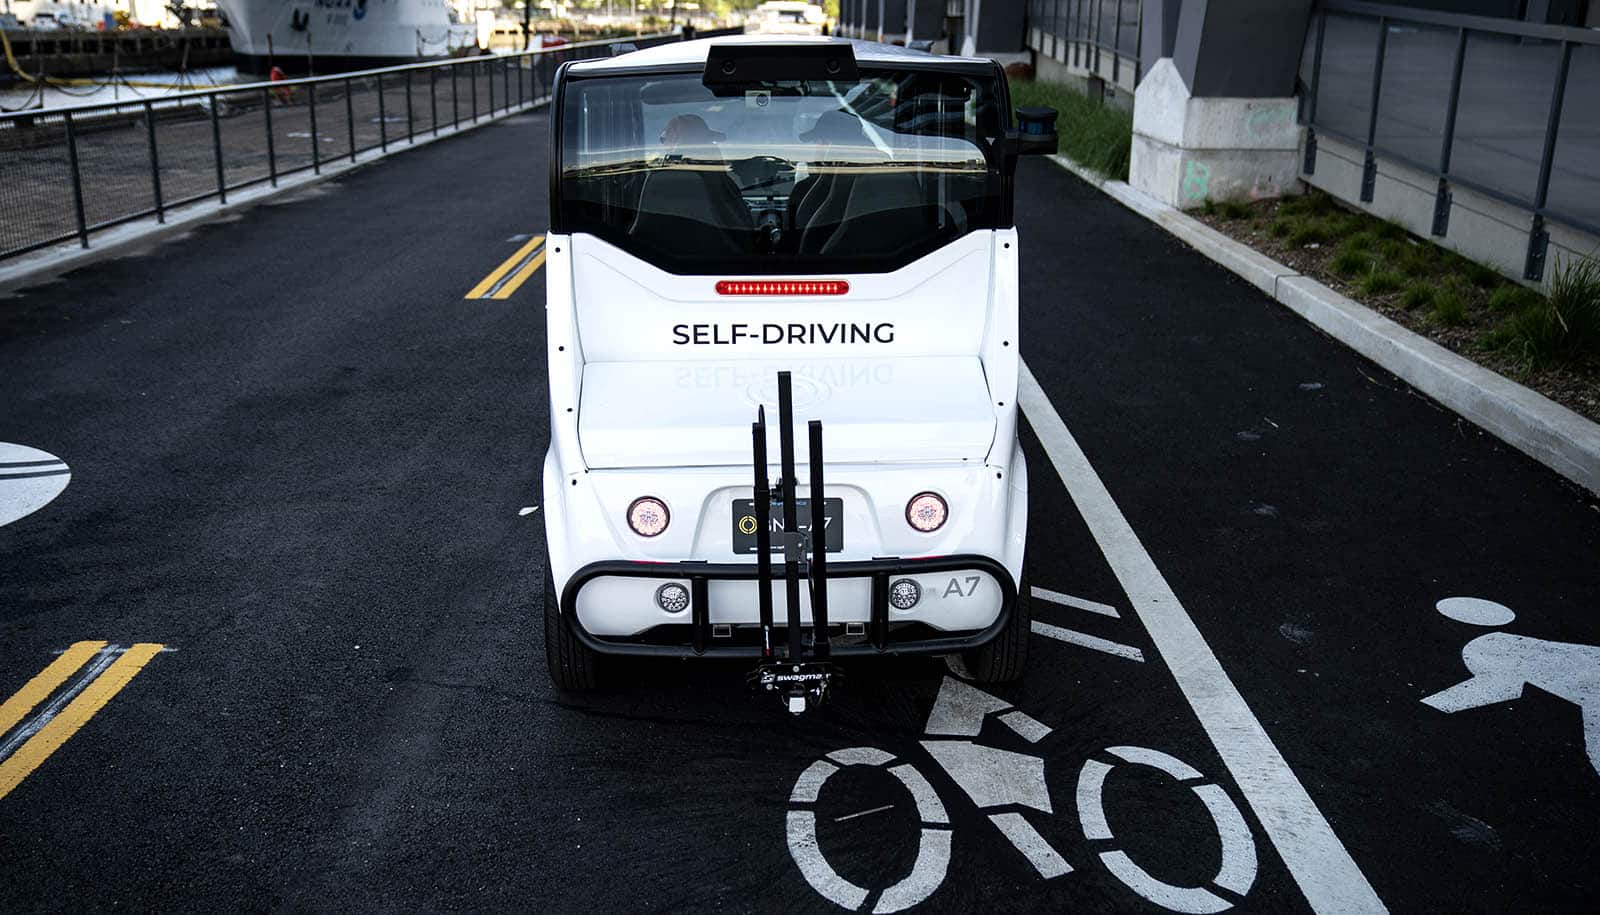 self-driving bus on street with symbols for bike lane and pedestrian walkway